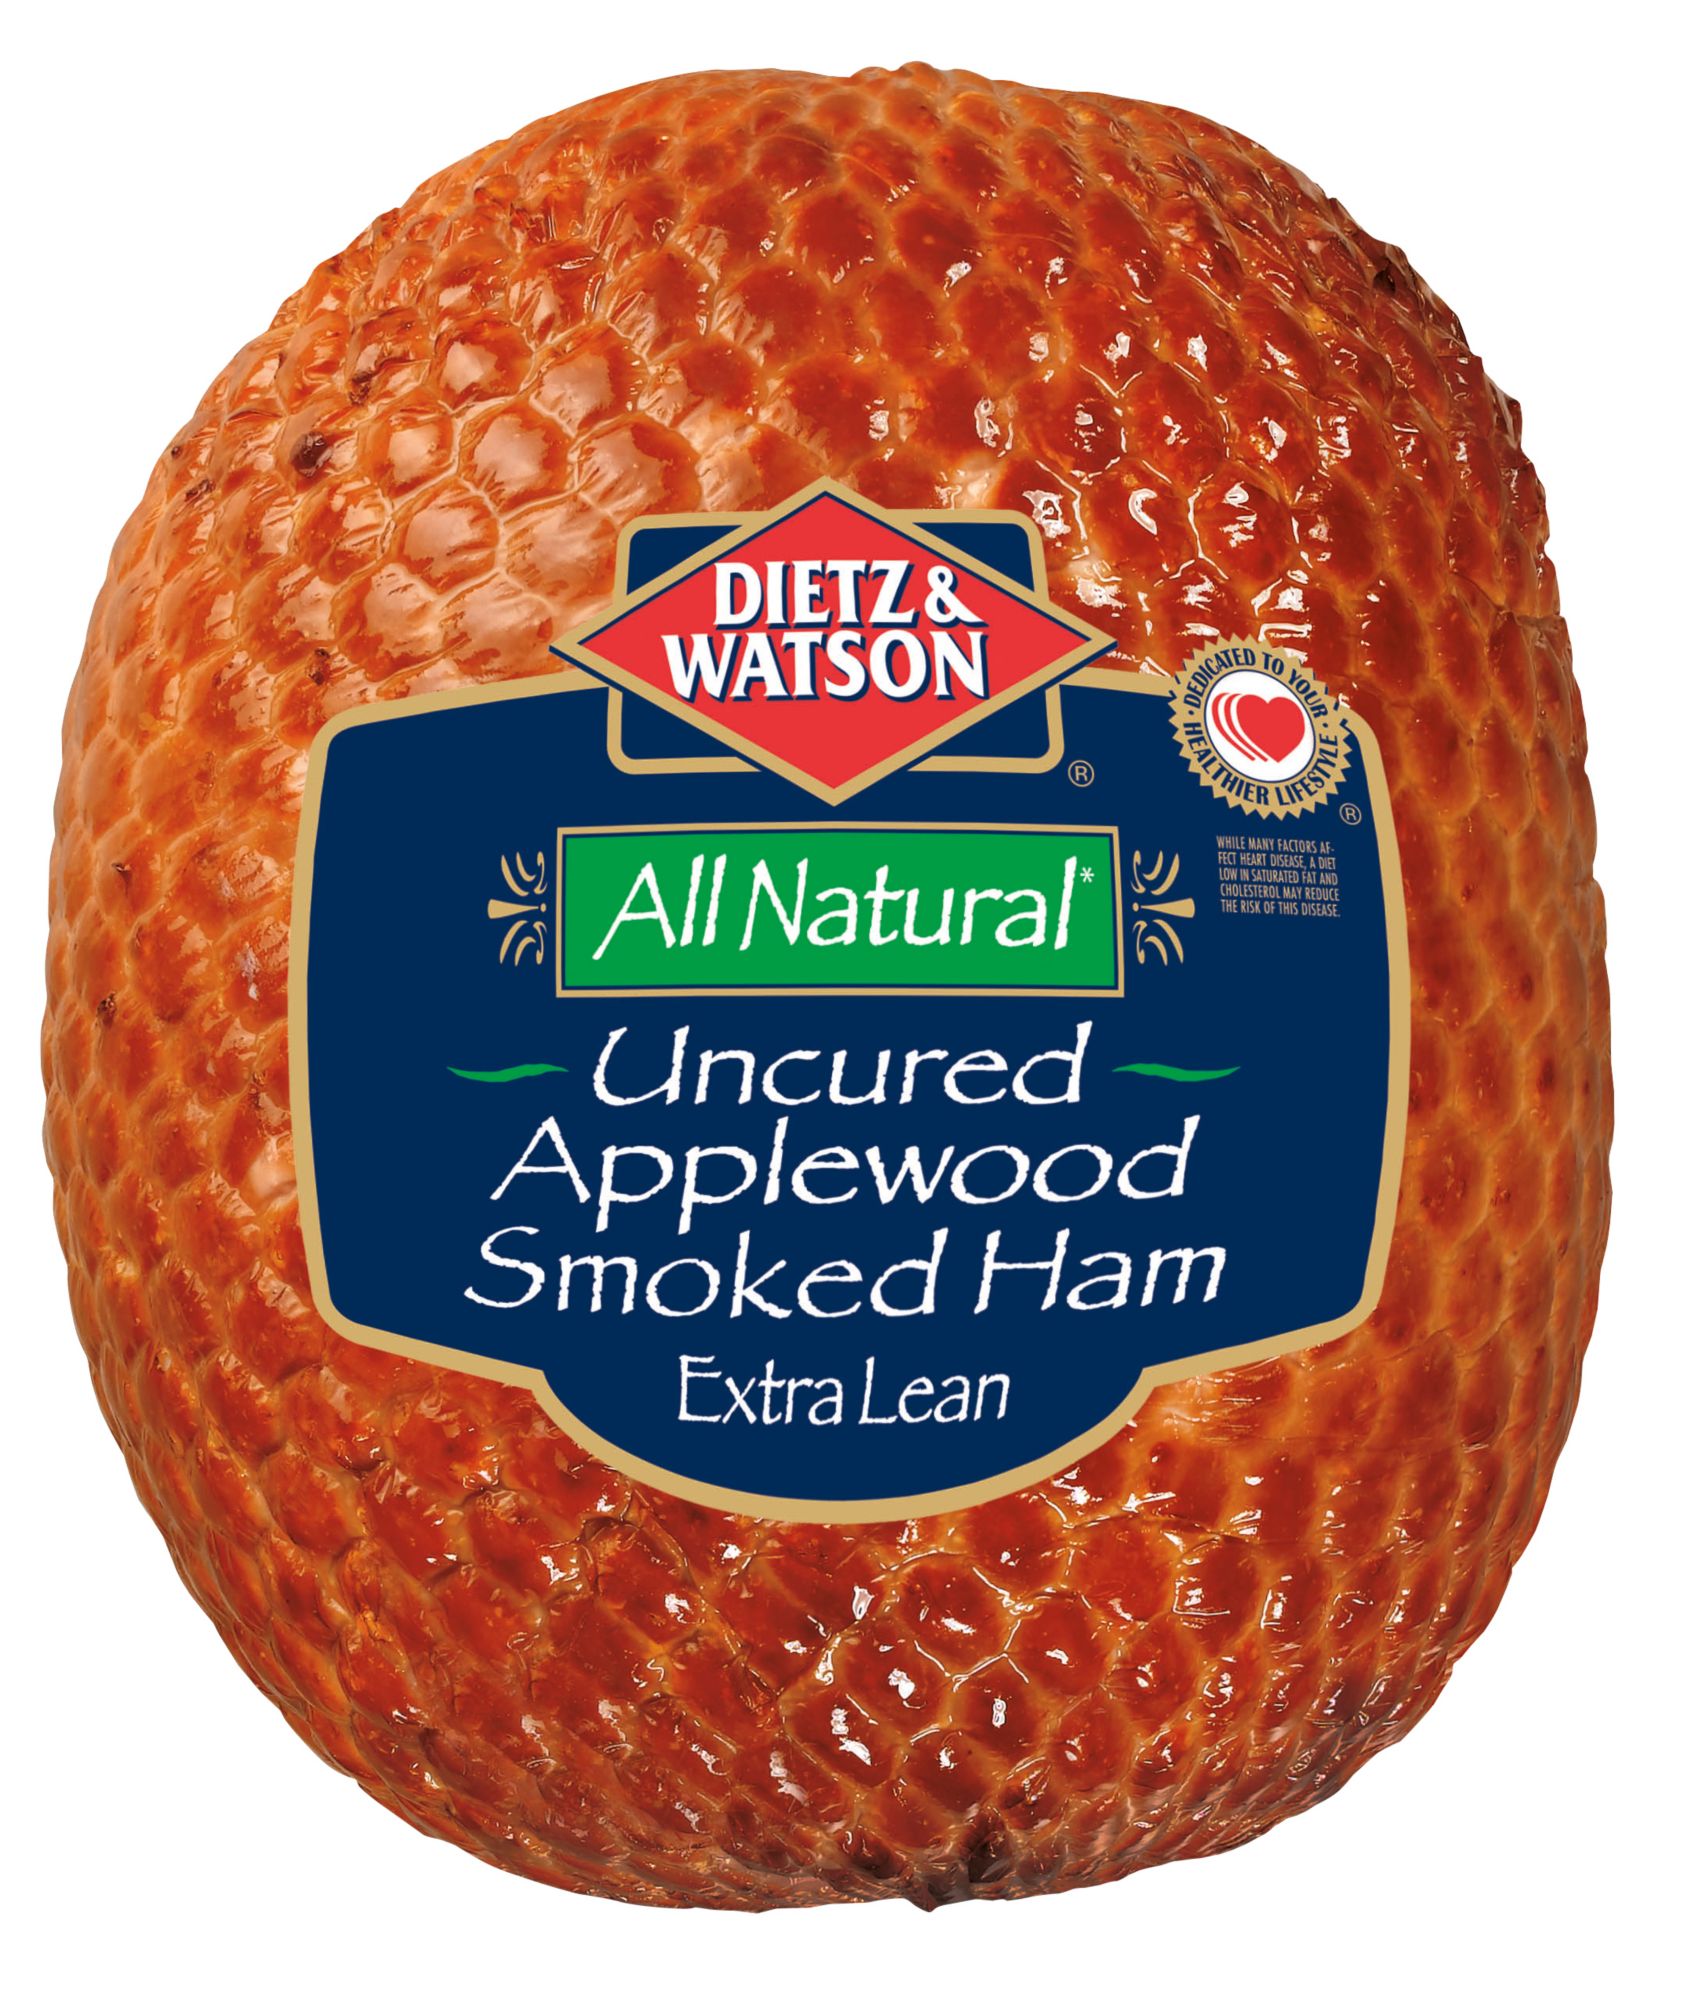 All-Natural Uncured Applewood Smoked Ham, 0.75-1.5 lb Standard Cut